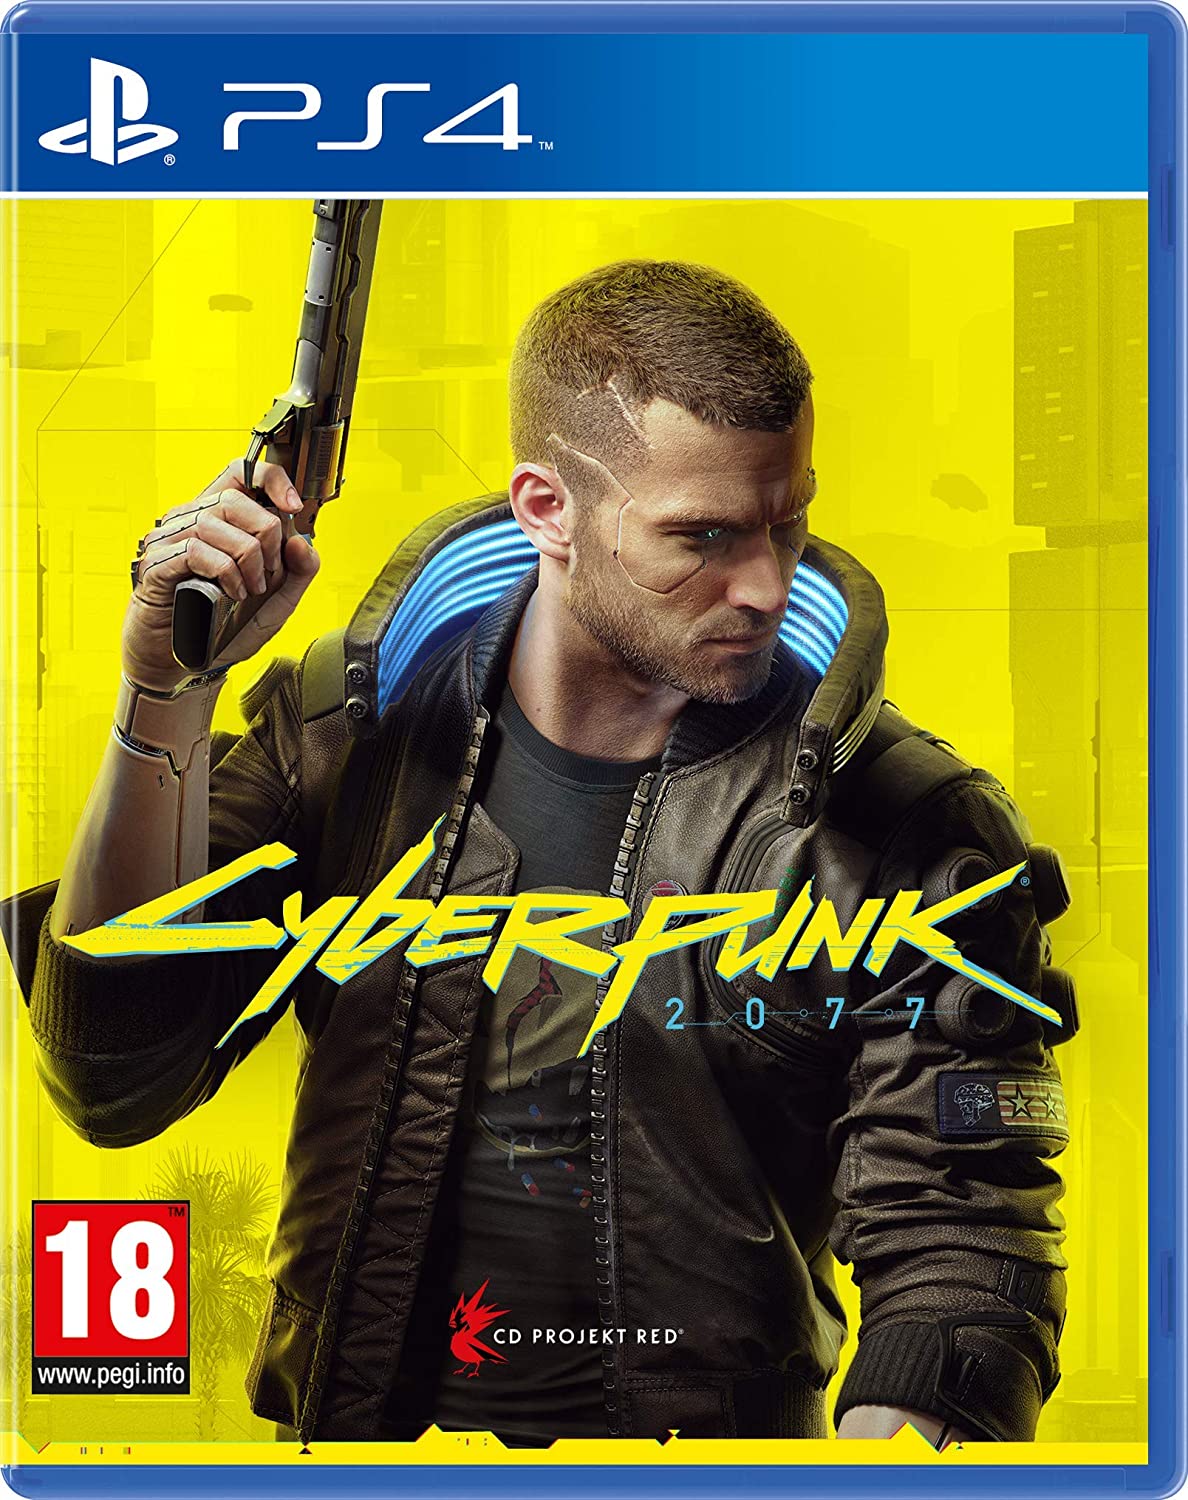 CYBER PUNK PS4 GAME BRAND NEW WITH SEALED - saynama